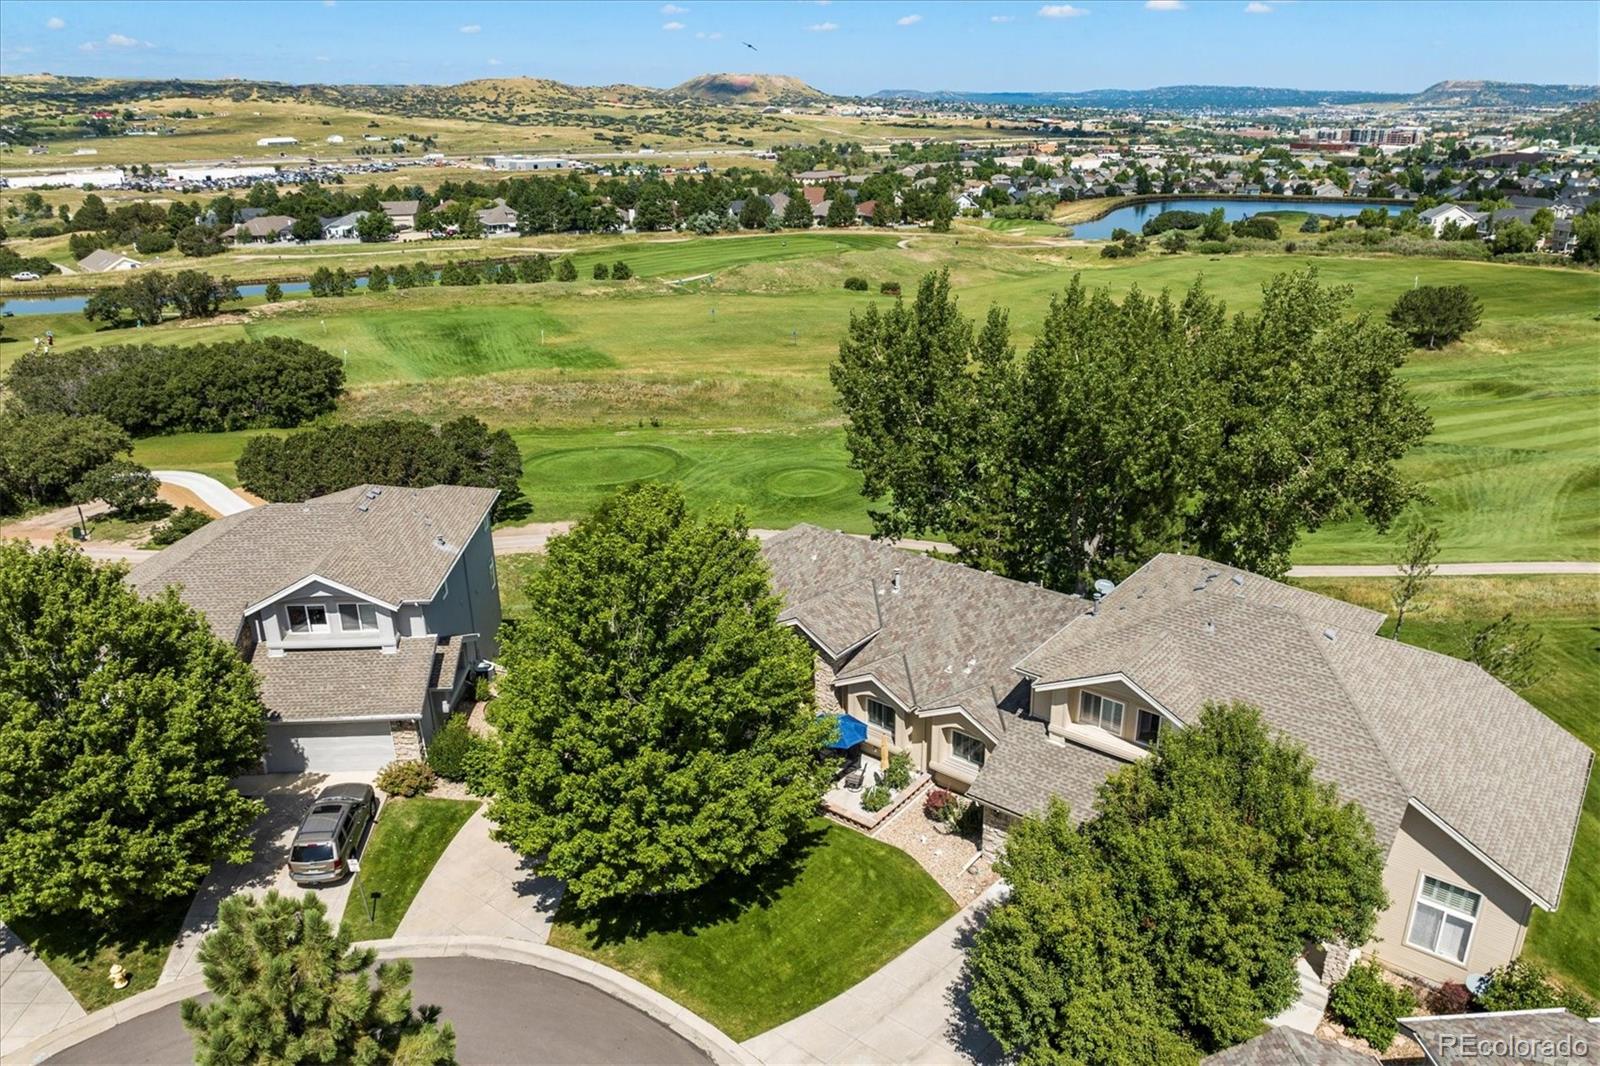 Report Image for 2109  Brierly Court,Castle Rock, Colorado